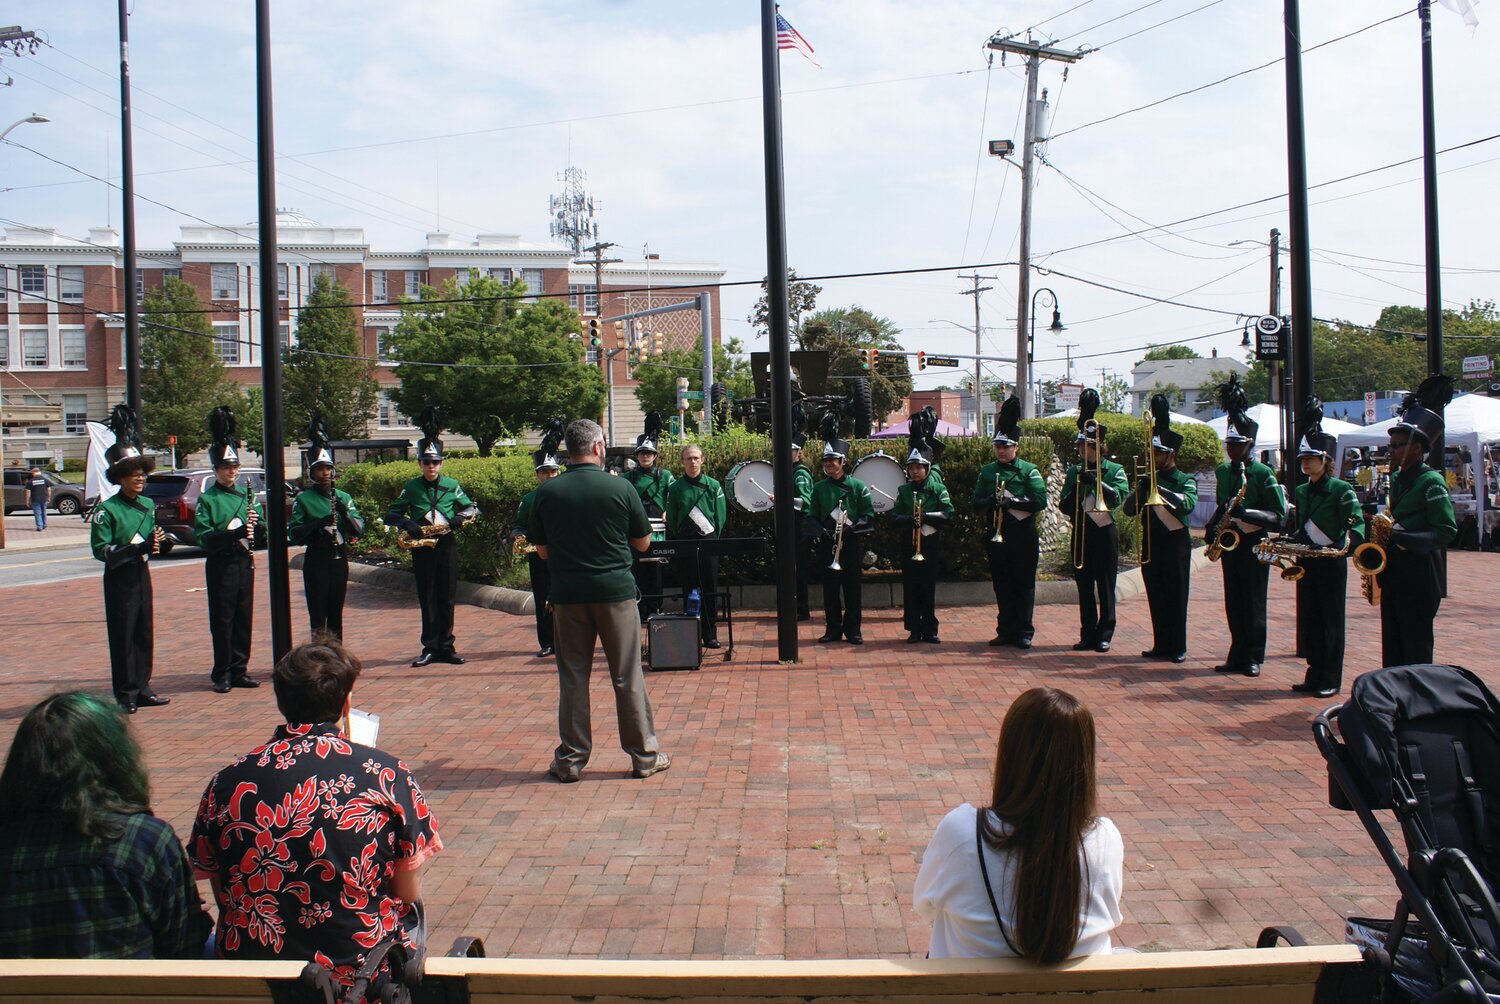 MUSICAL GUESTS: The Cranston High School East band entertained attendees to the Spring Festival by setting up on Rolfe Square in full school band regalia.